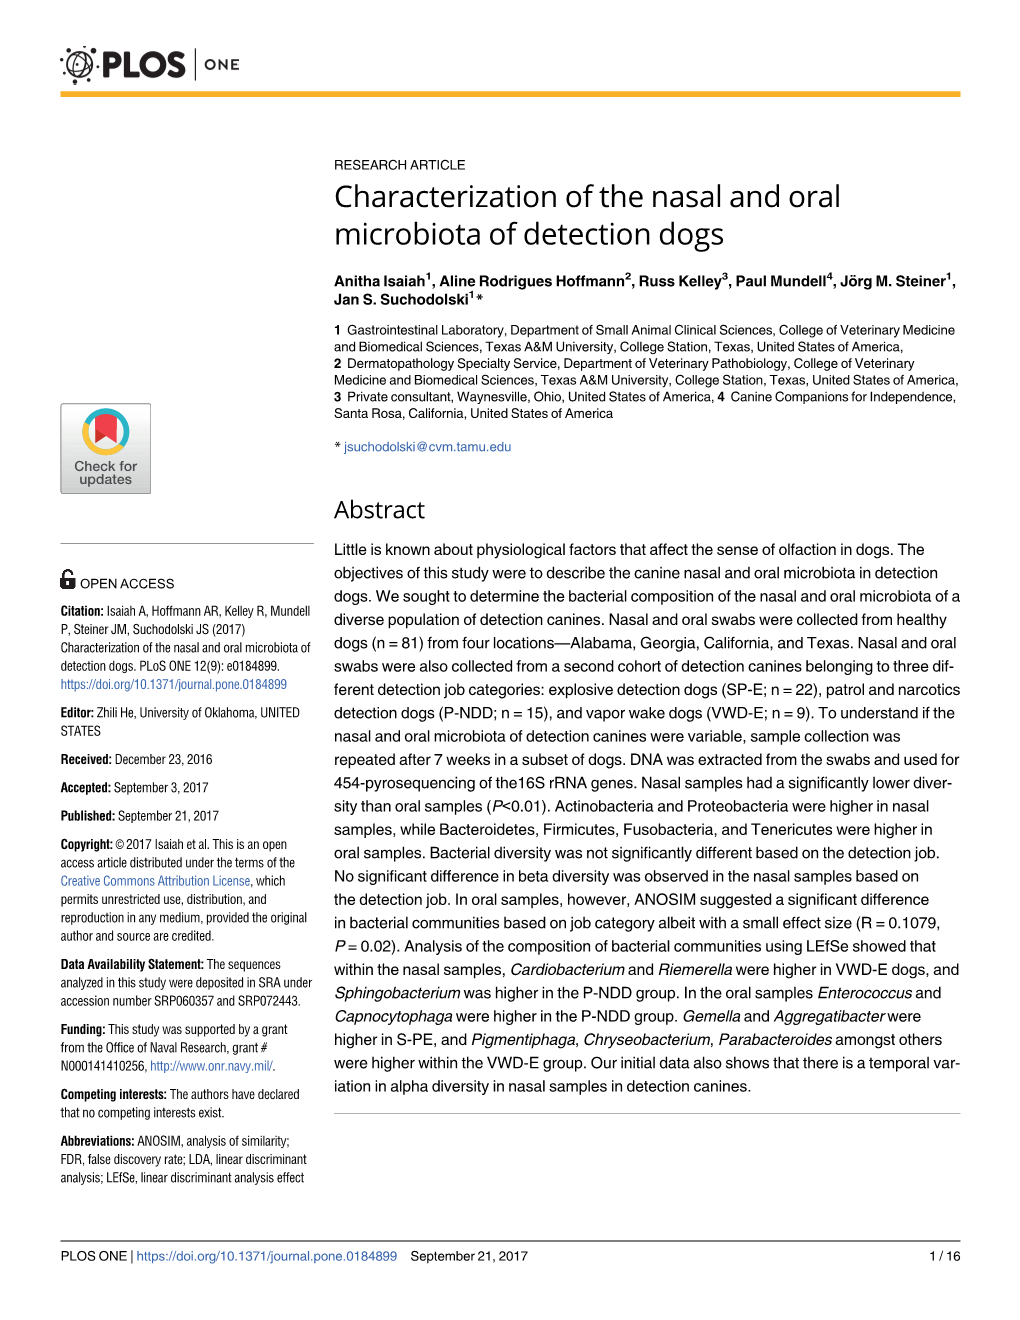 Characterization of the Nasal and Oral Microbiota of Detection Dogs